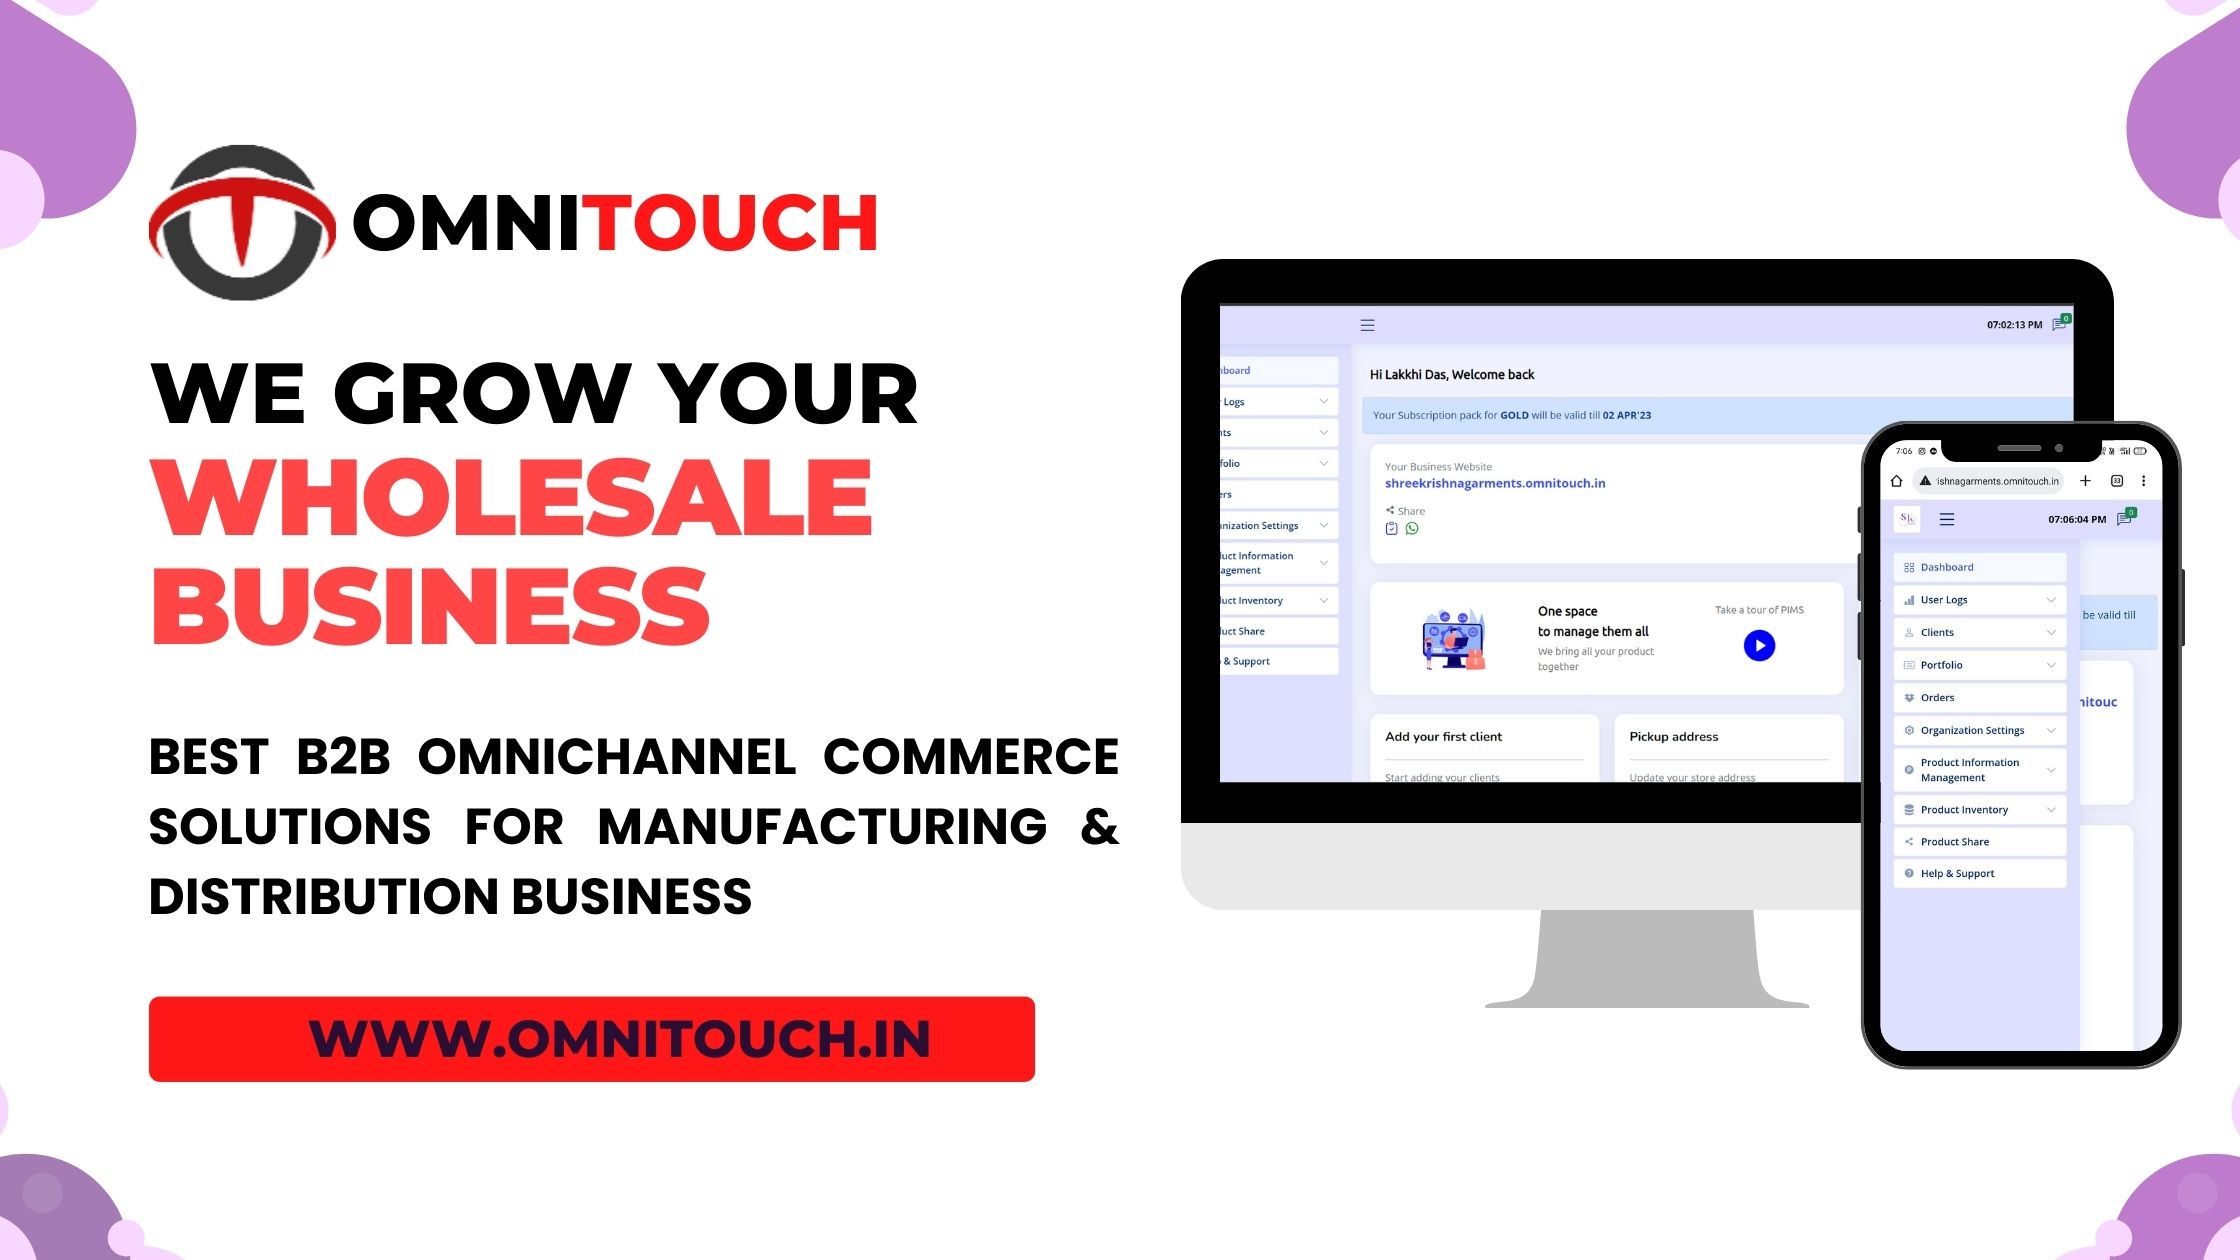 Going Digital: How Omnitouch Can Help Your Wholesale Business Grow